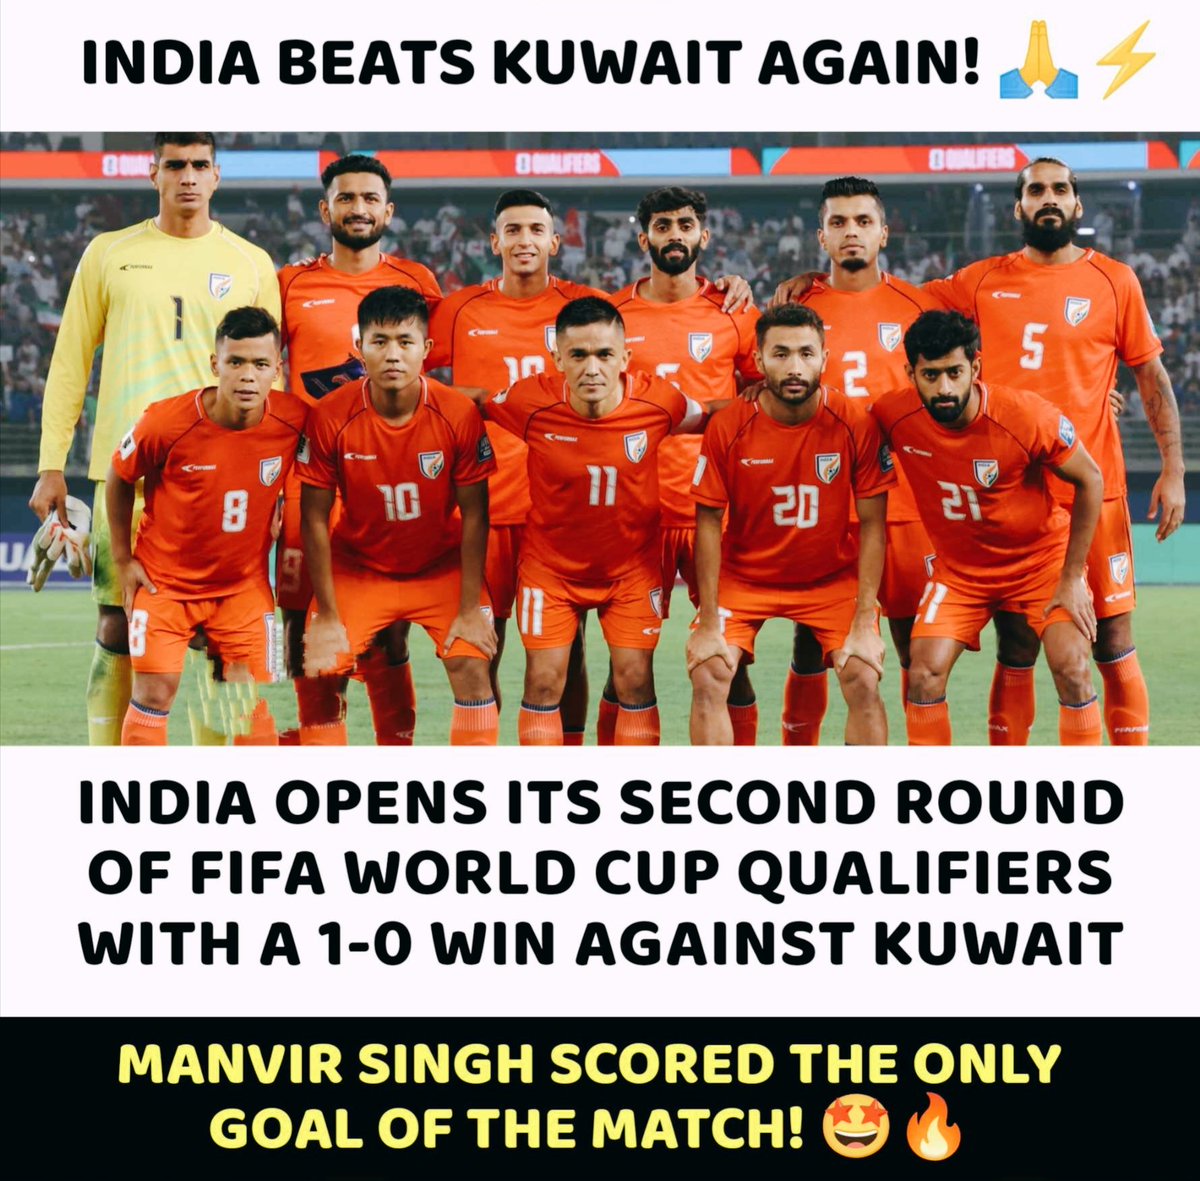 India beats Kuwait by 1-0 in World Cup qualifiers ⚽

Support team India 🤝 like❤️‍🔥, Rp 

#KUWIND #FIFAWorldCup
#CWC2023Final ..... 🏆 🇮🇳 🏏
#FIFAWorldCupFinal ... 🏆 🇮🇳 ⚽
#BrandedFeatures 
#INDvsAUS #IndianFootball #FootballLover #ViratKohli𓃵 #RohitSharma  #SunilChhetri